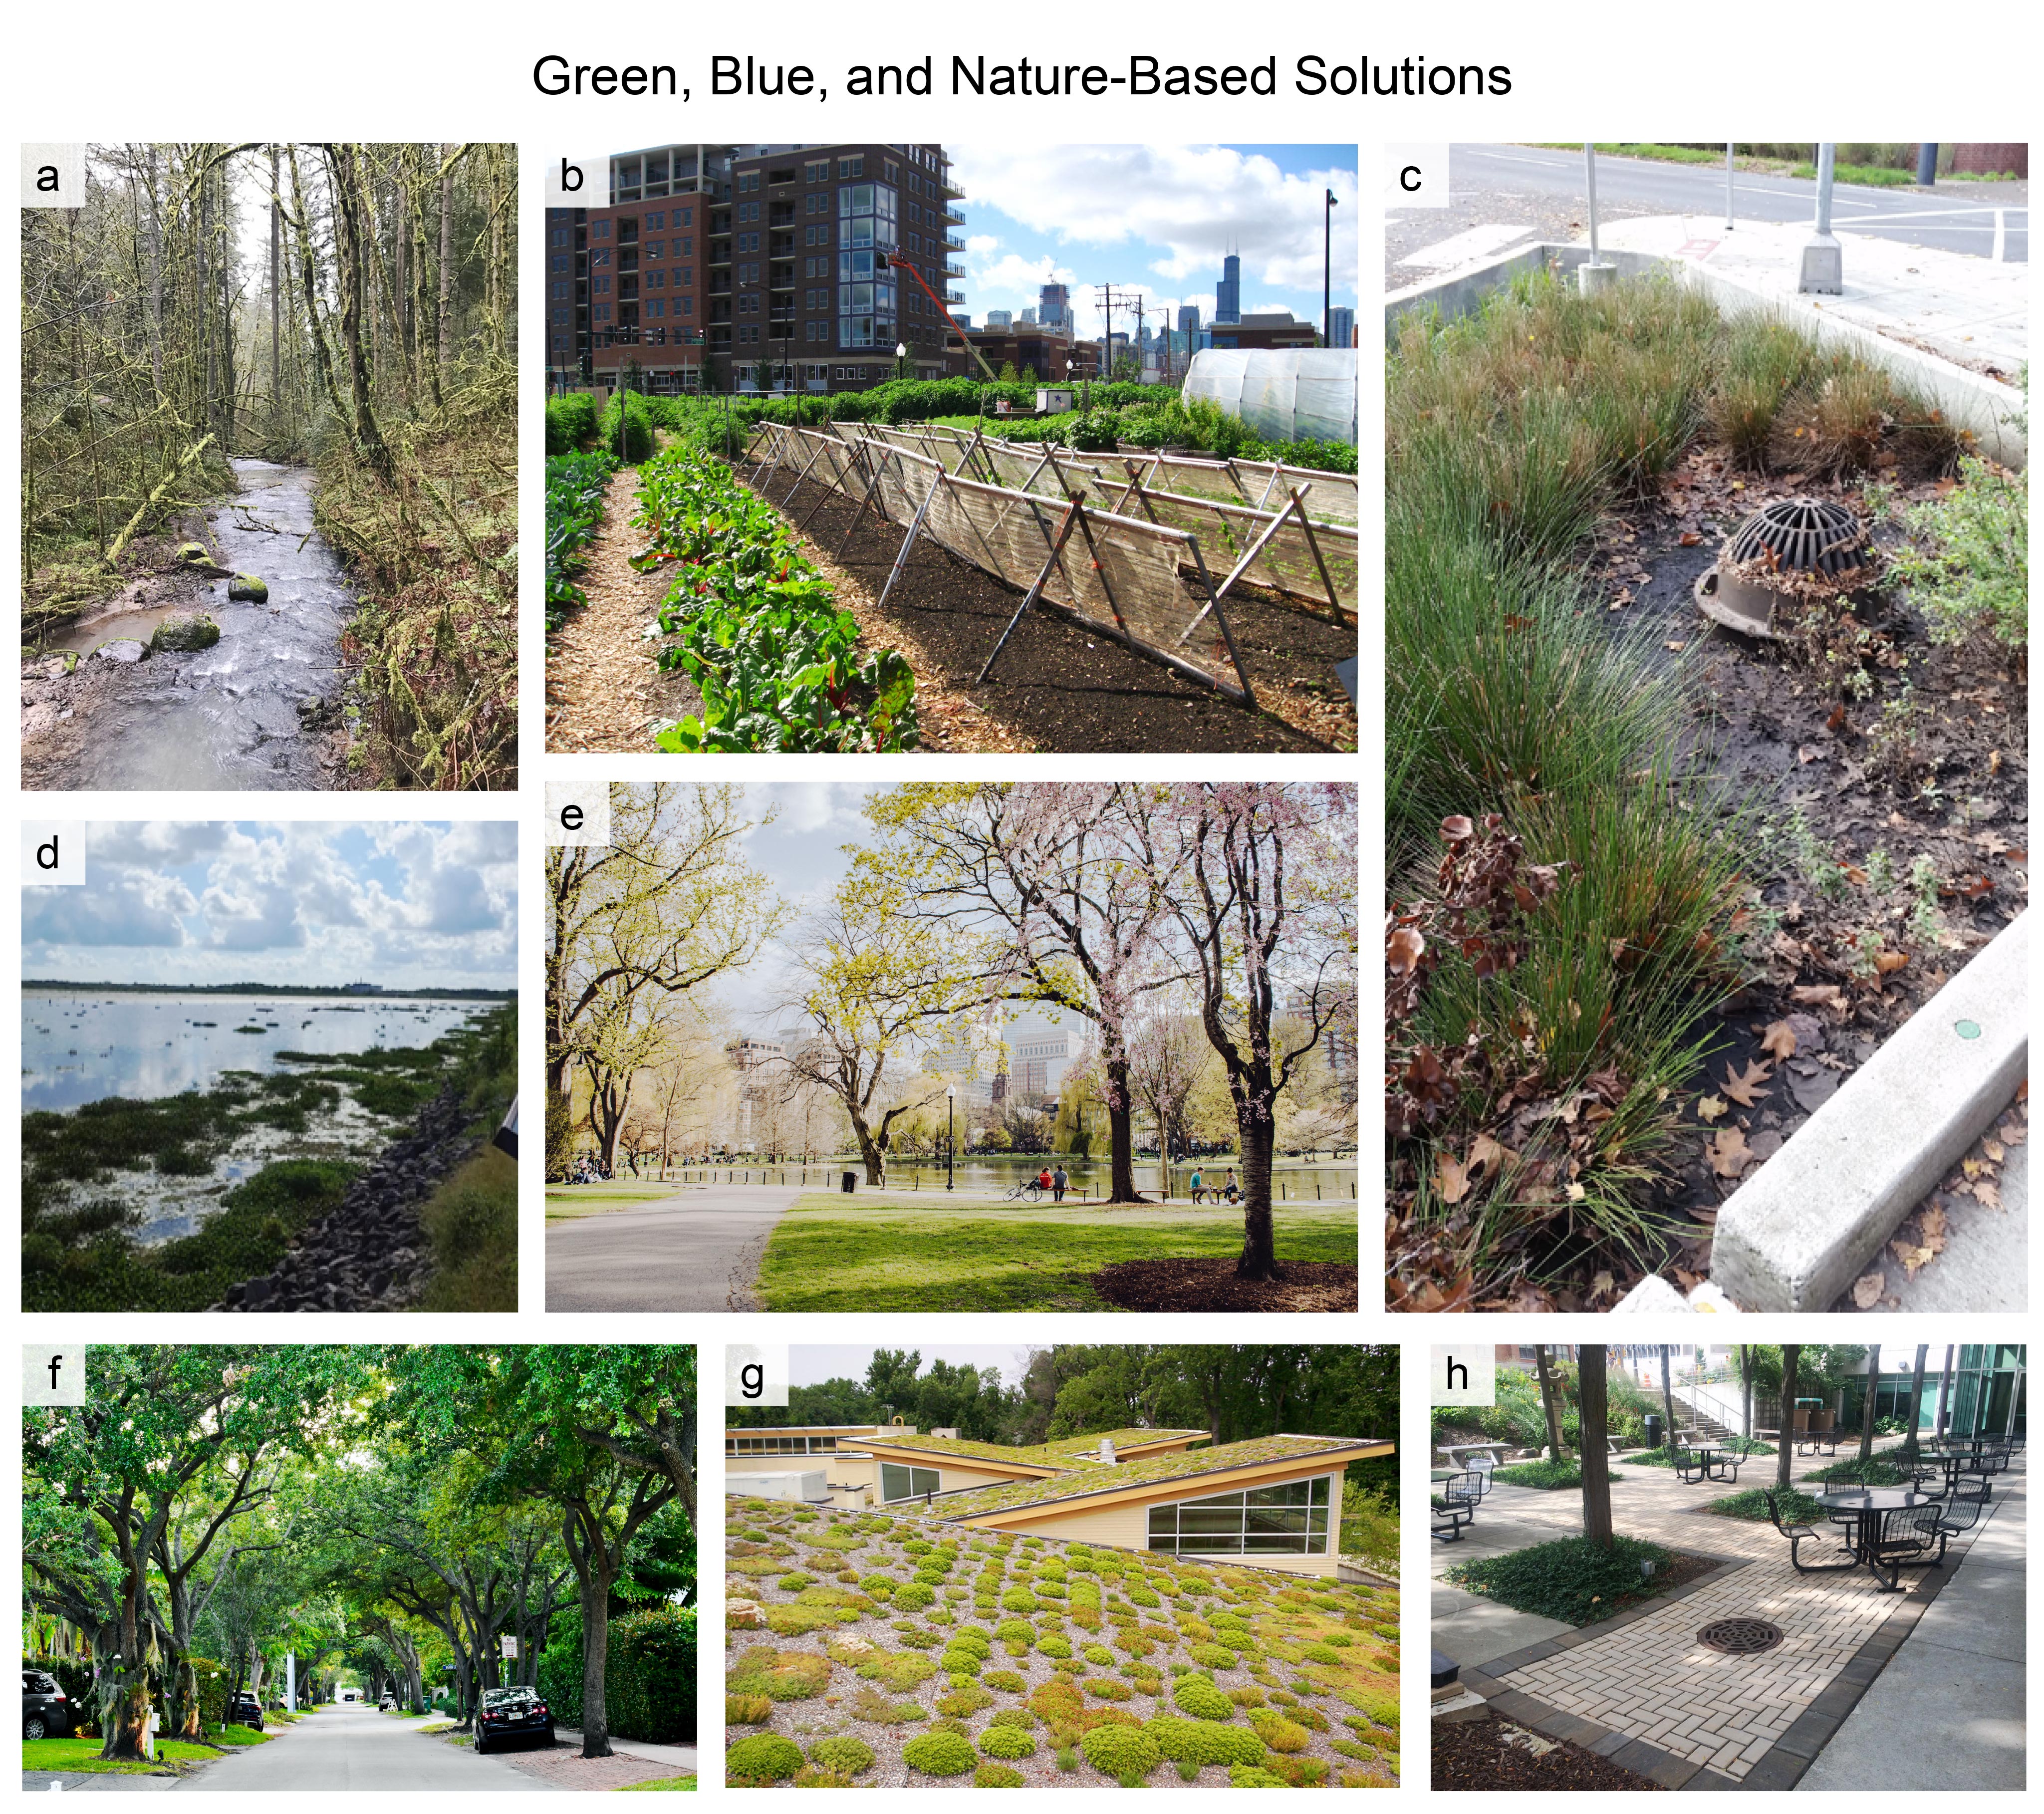 Green, Blue, and Nature-Based Solutions